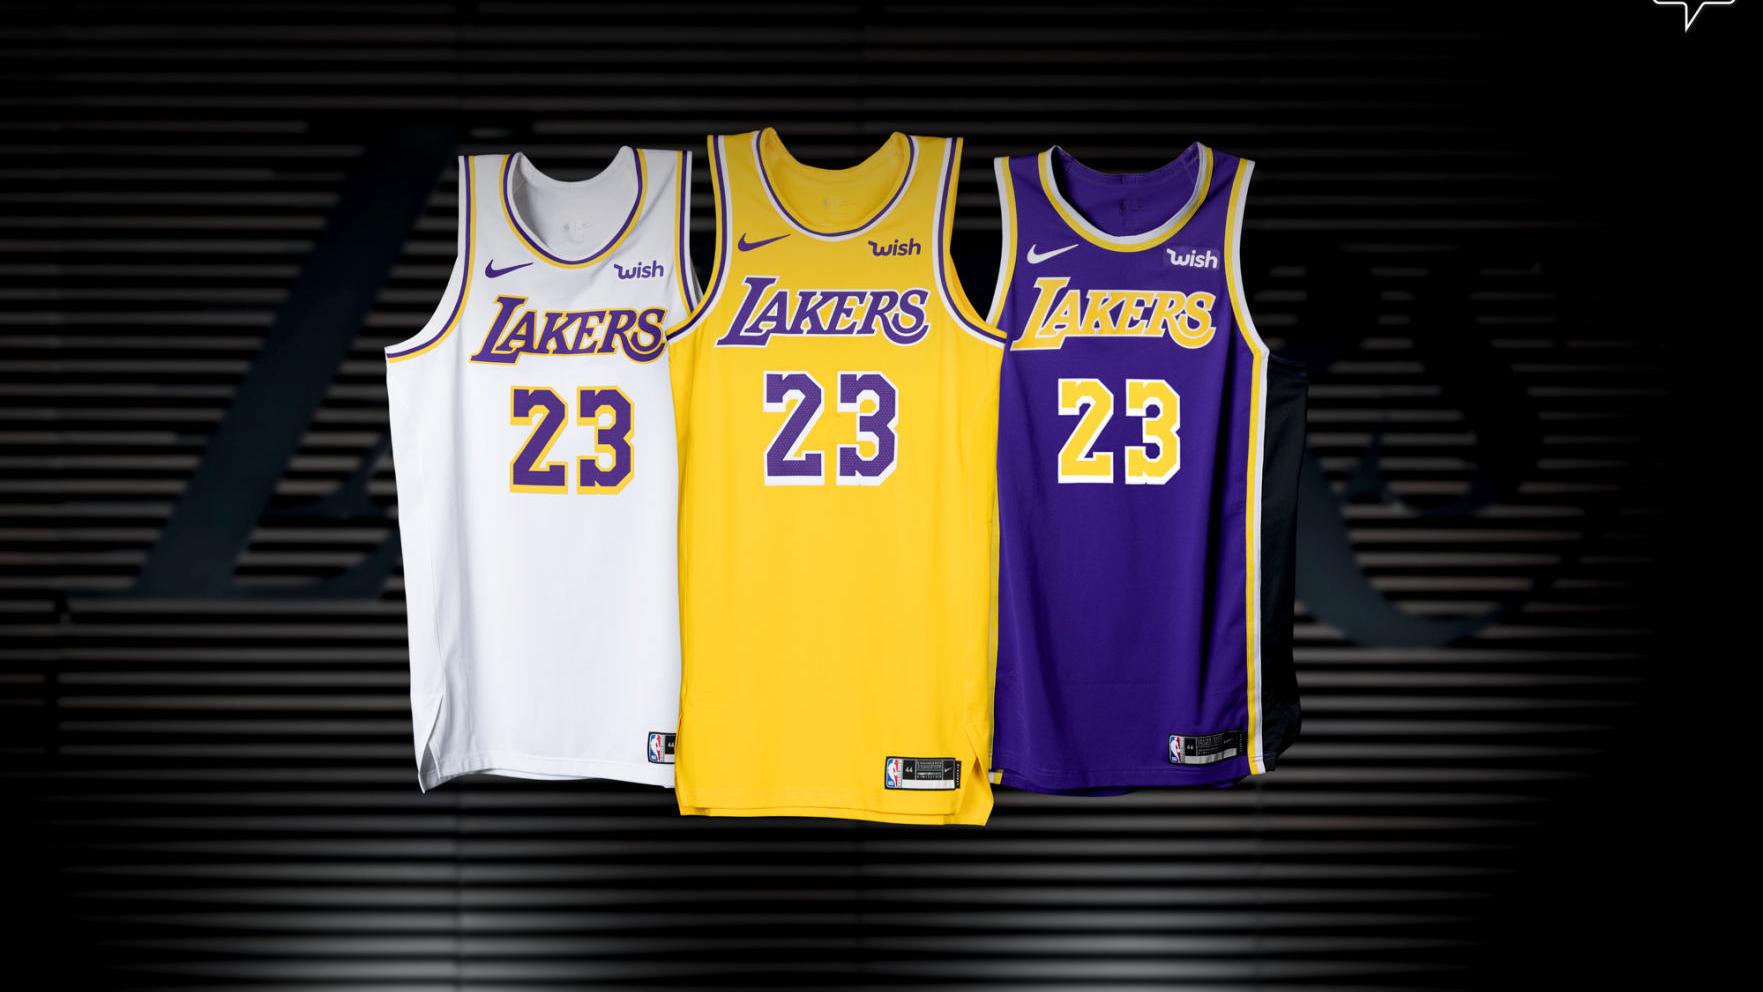 Los Angeles Lakers unveil new jersey design